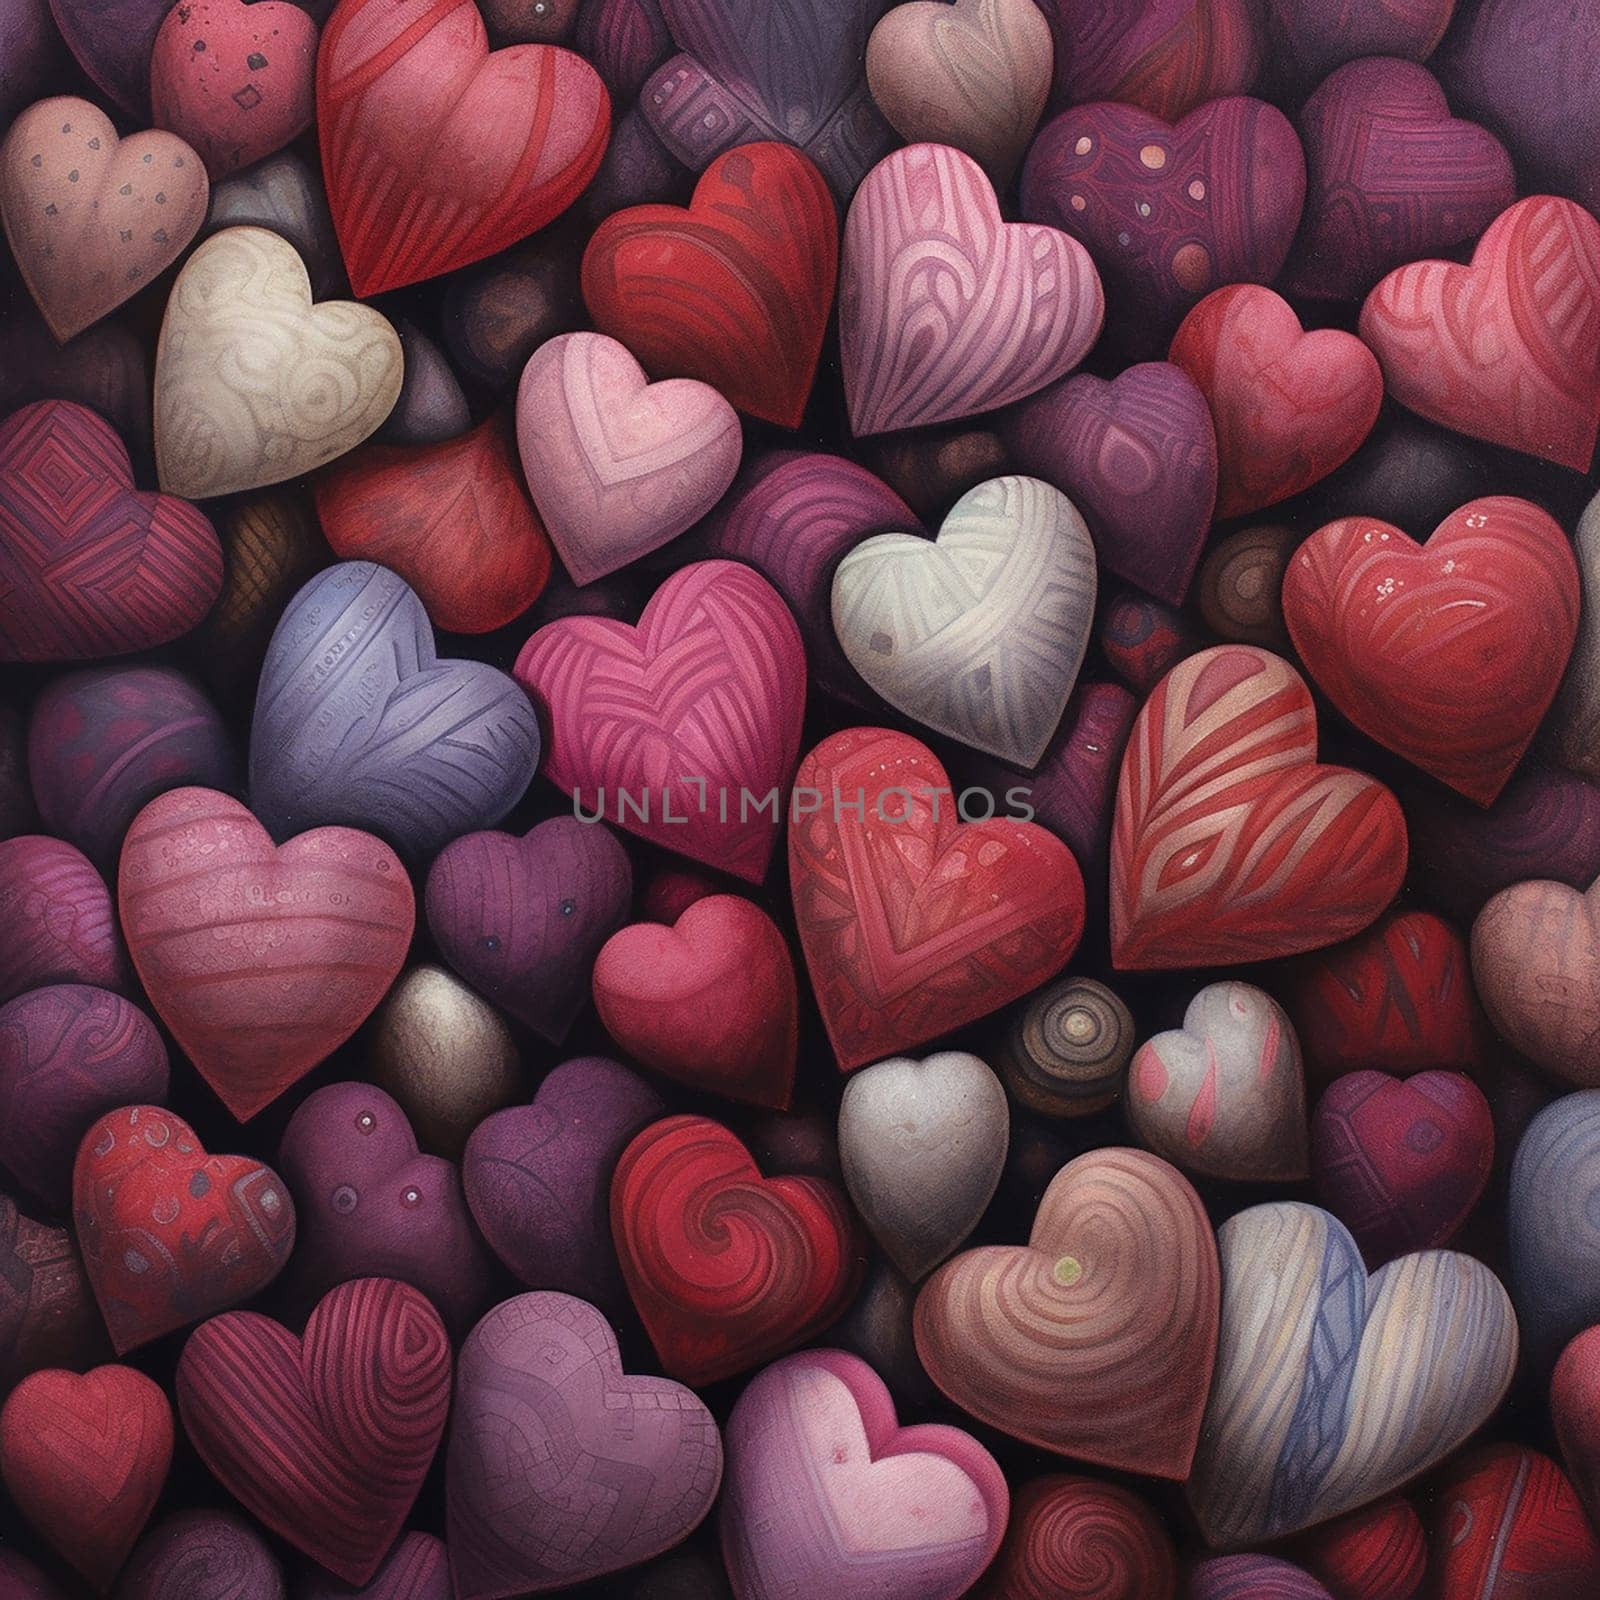 Multitude of stylized hearts in various shades and patterns by Hype2art